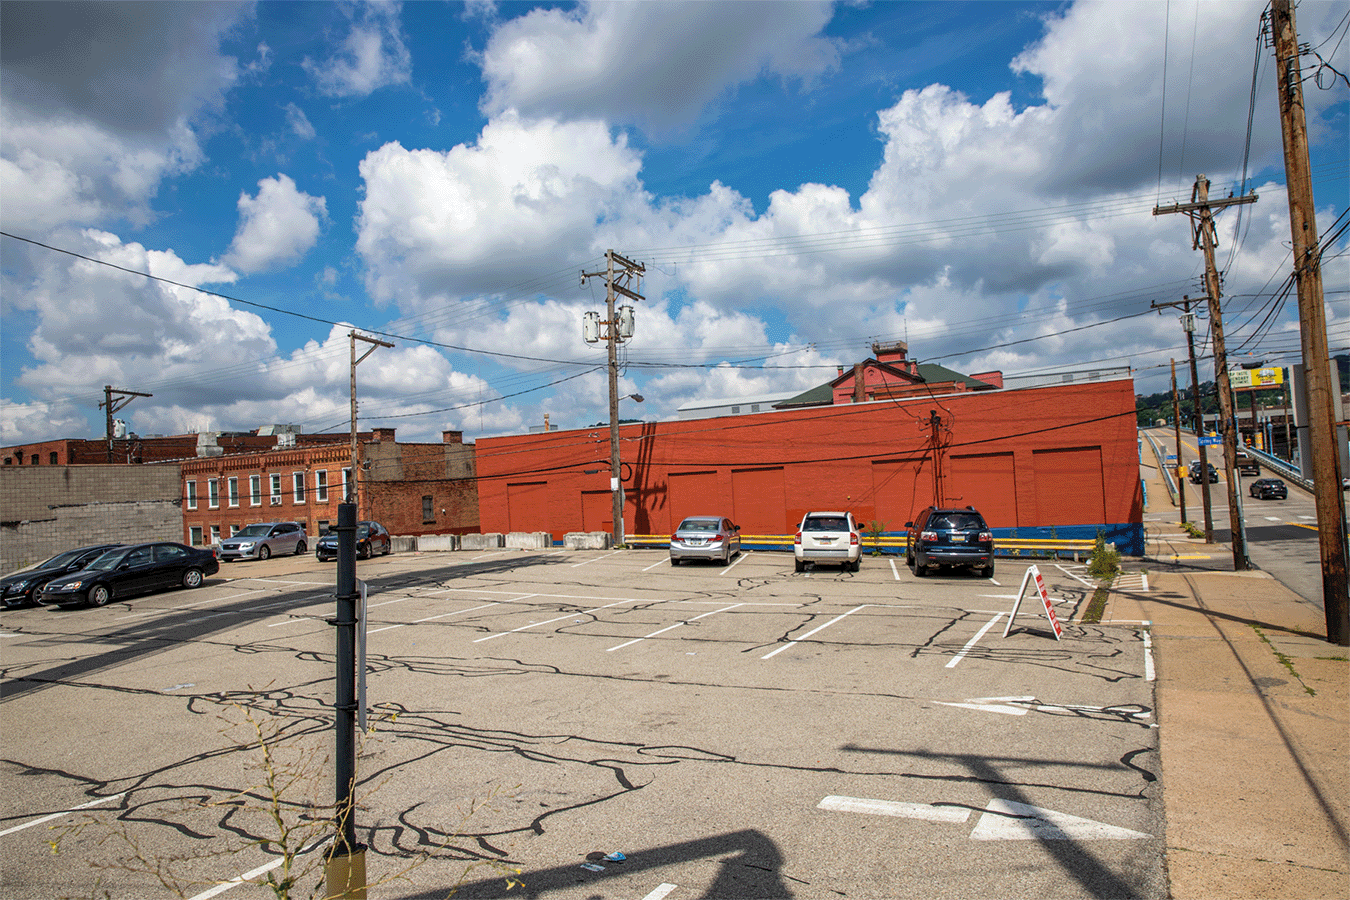 large empty parking lot with oranger brick building behind